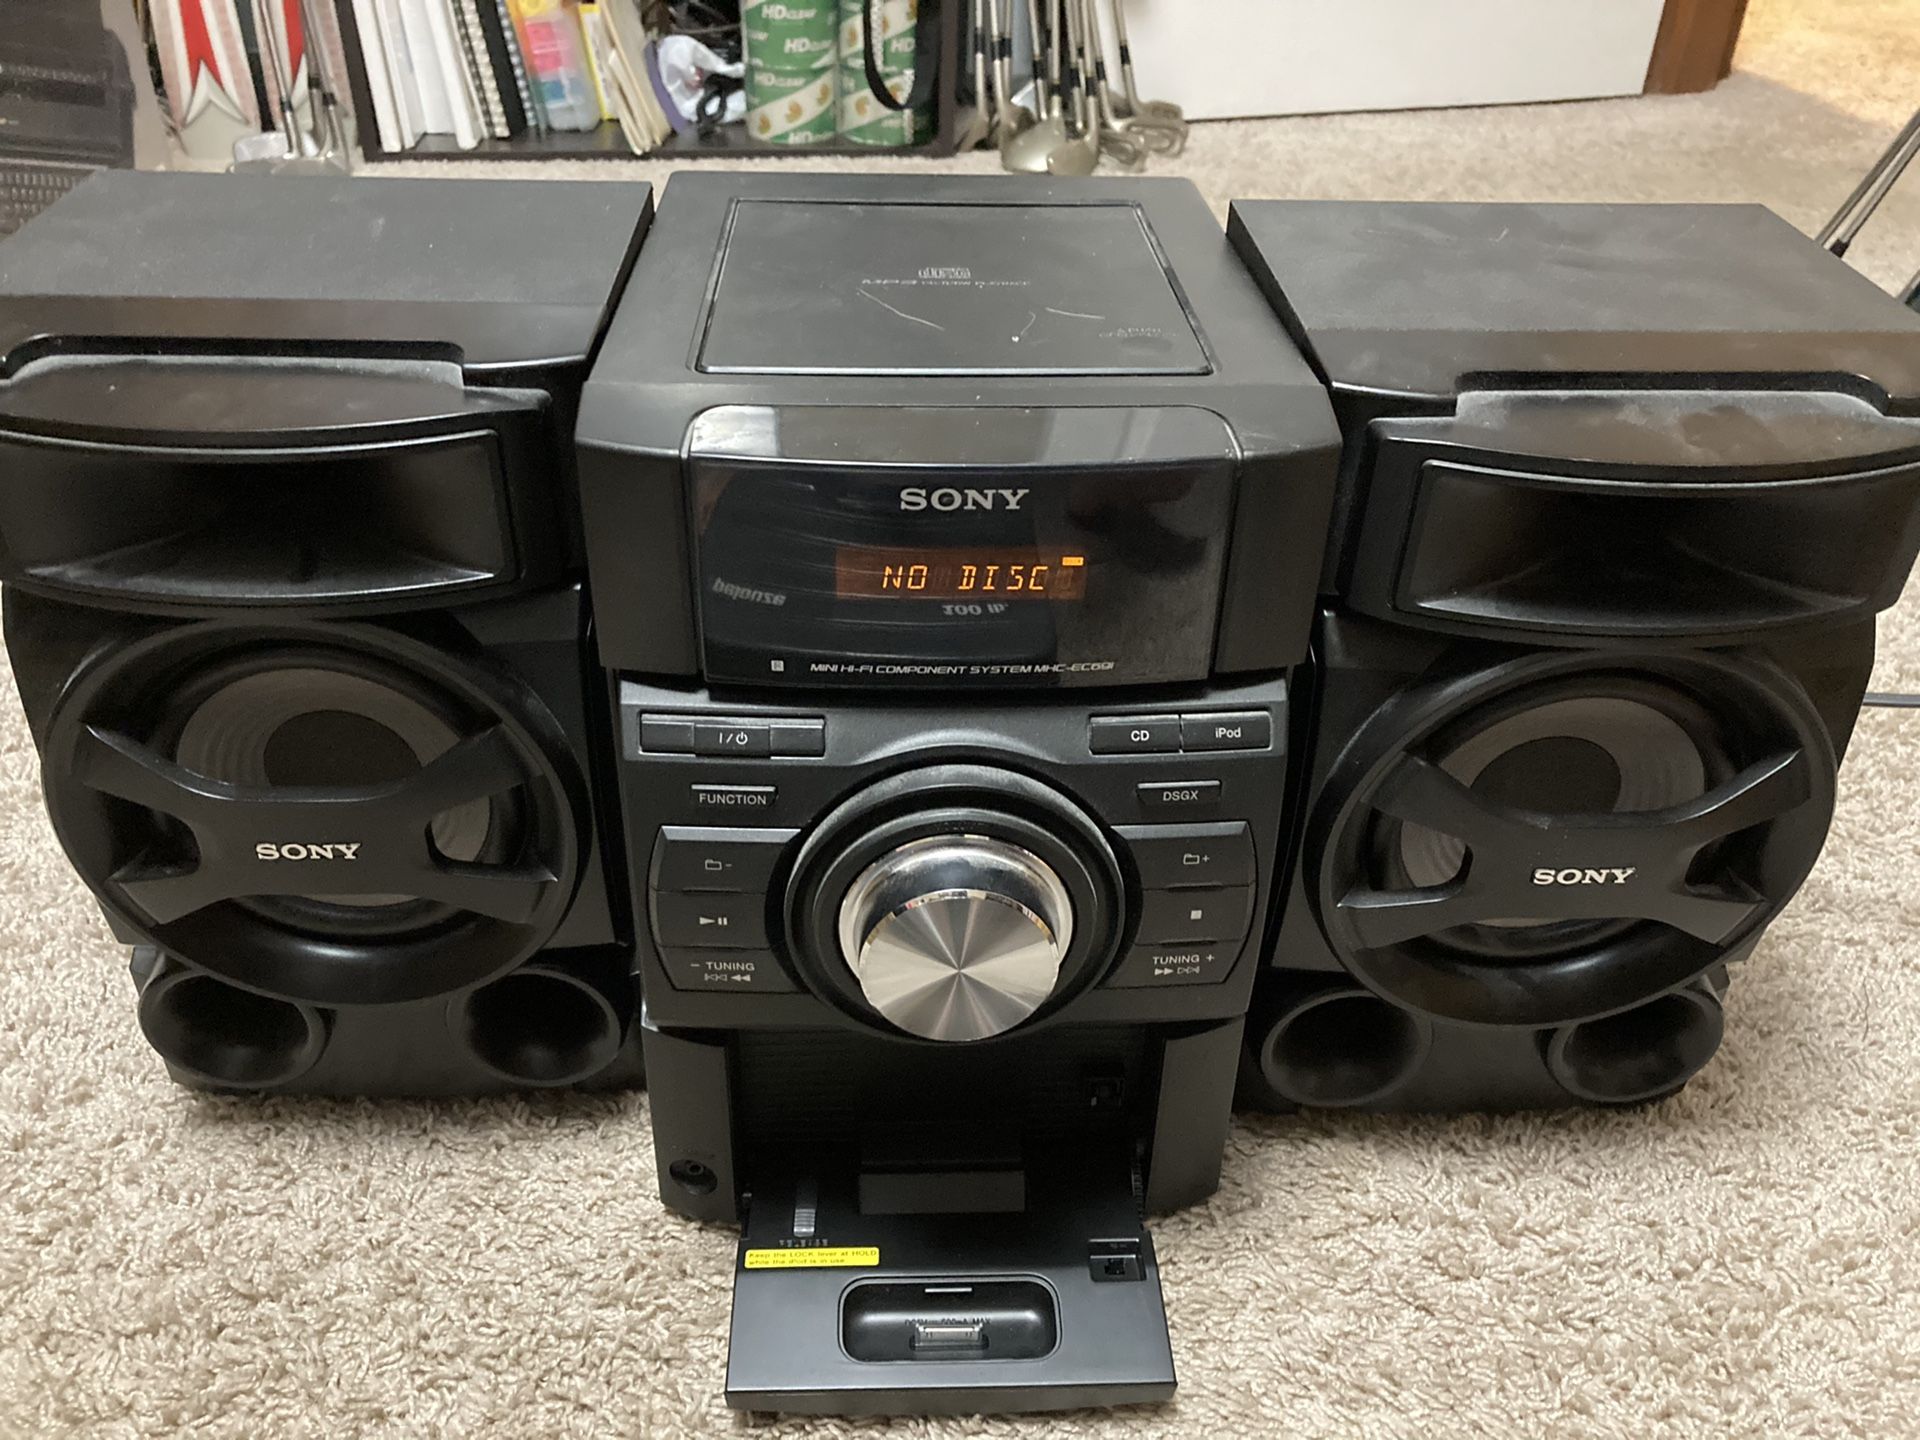 Sony bookshelf stereo system with iPod hook up AM/FM CD And speakers